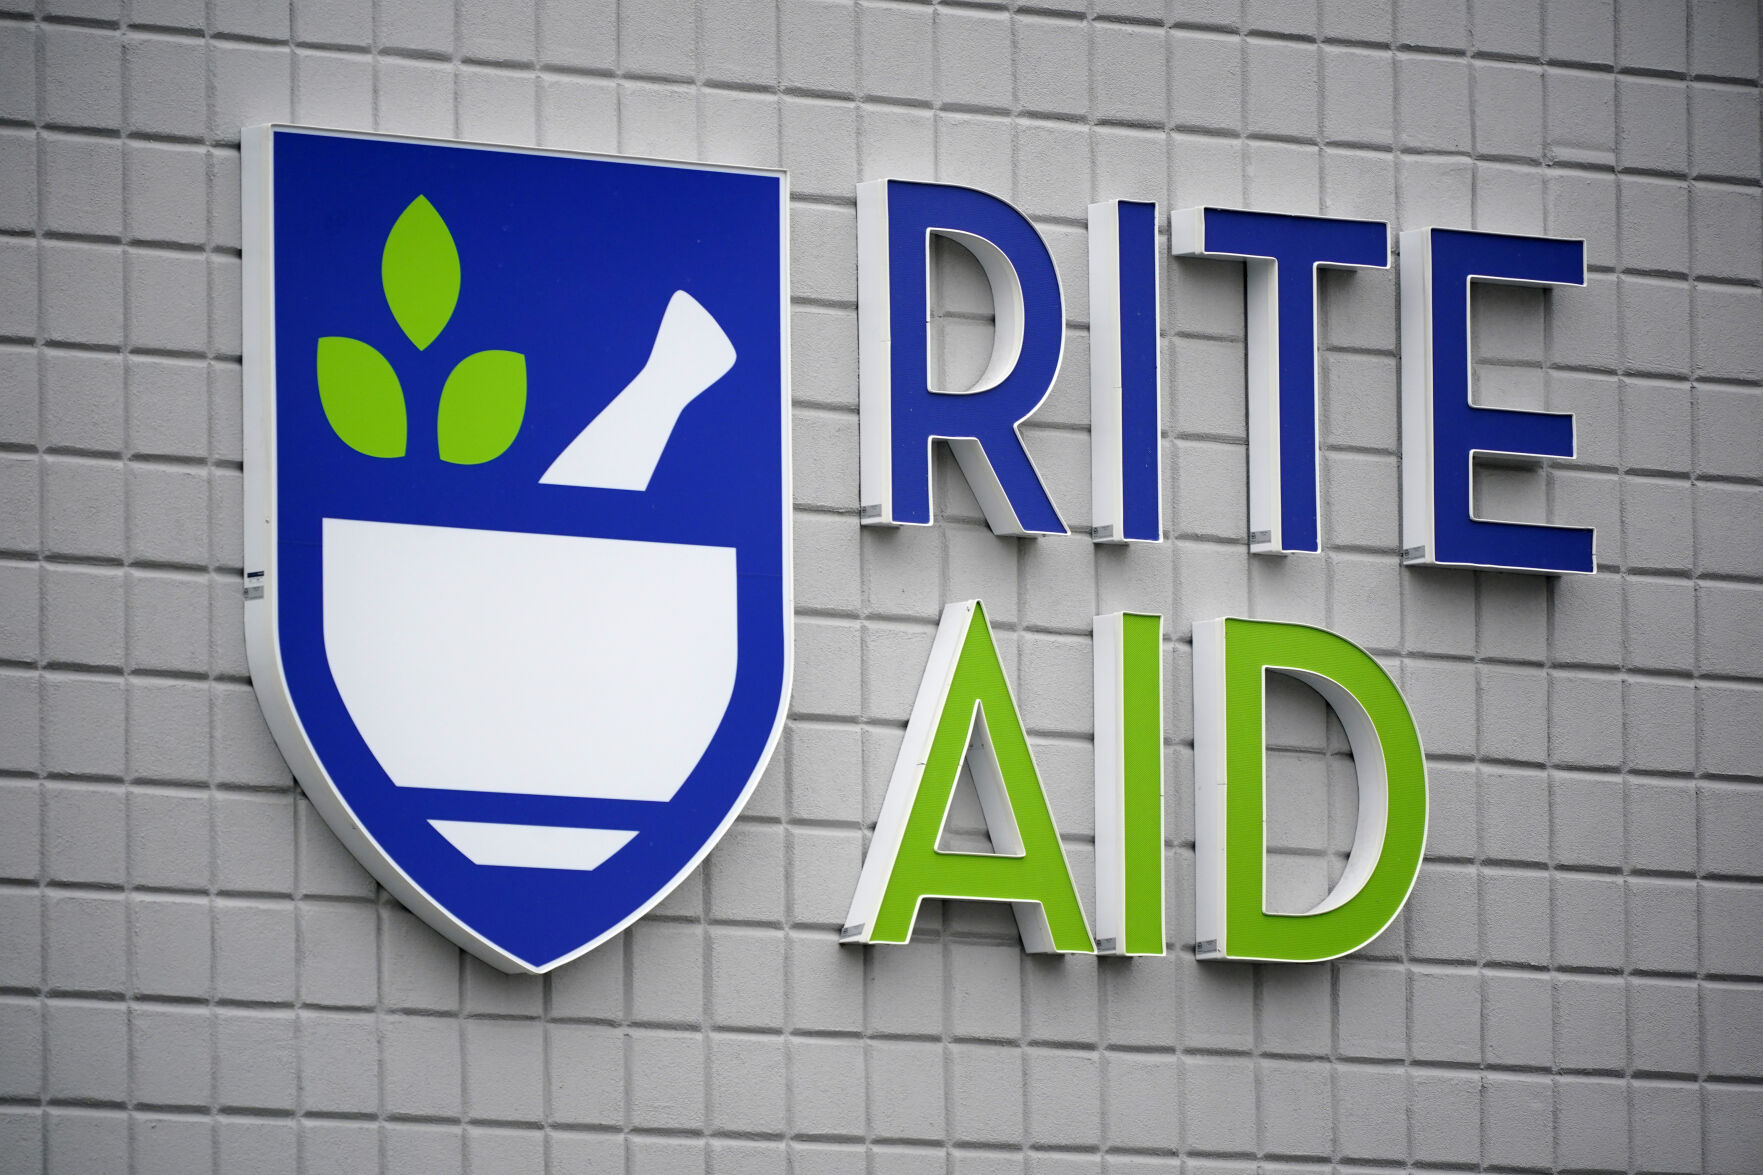 <p>FILE - This photo shows a sign of Rite Aid on its store in Pittsburgh on Jan. 23, 2023. Rite Aid, a major U.S. pharmacy chain, said Sunday, Oct. 15, that it has filed for bankruptcy as part of its effort to restructure its finances. (AP Photo/Gene J. Puskar, File)</p>   PHOTO CREDIT: Gene J. Puskar